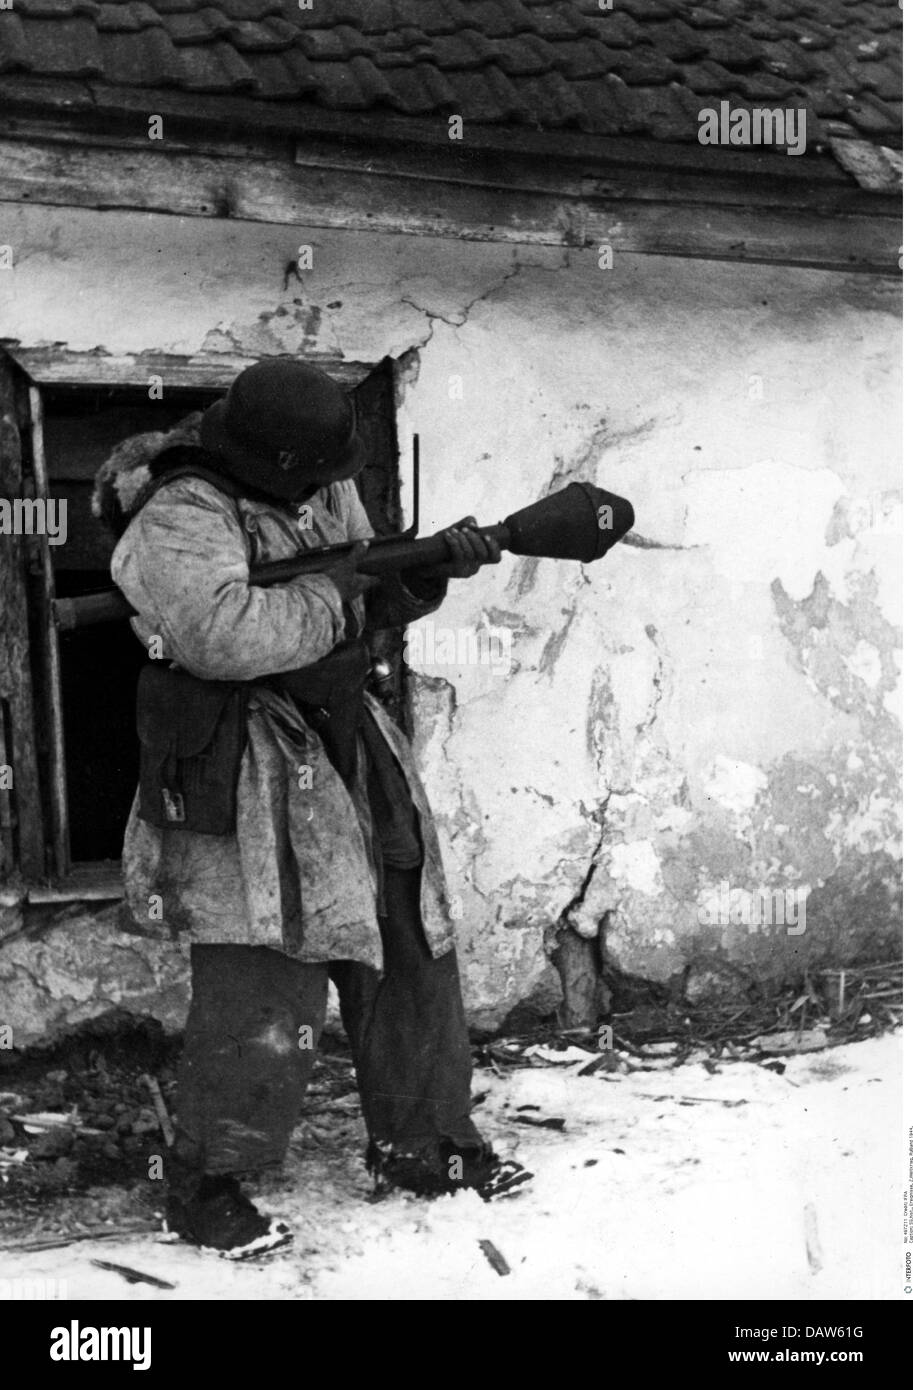 events, Second World War / WWII, Russia 1944 / 1945, soldier of the Waffen-SS with Panzerfaust, Britskoye, Ukraine, 15.1.1944, Additional-Rights-Clearences-Not Available Stock Photo